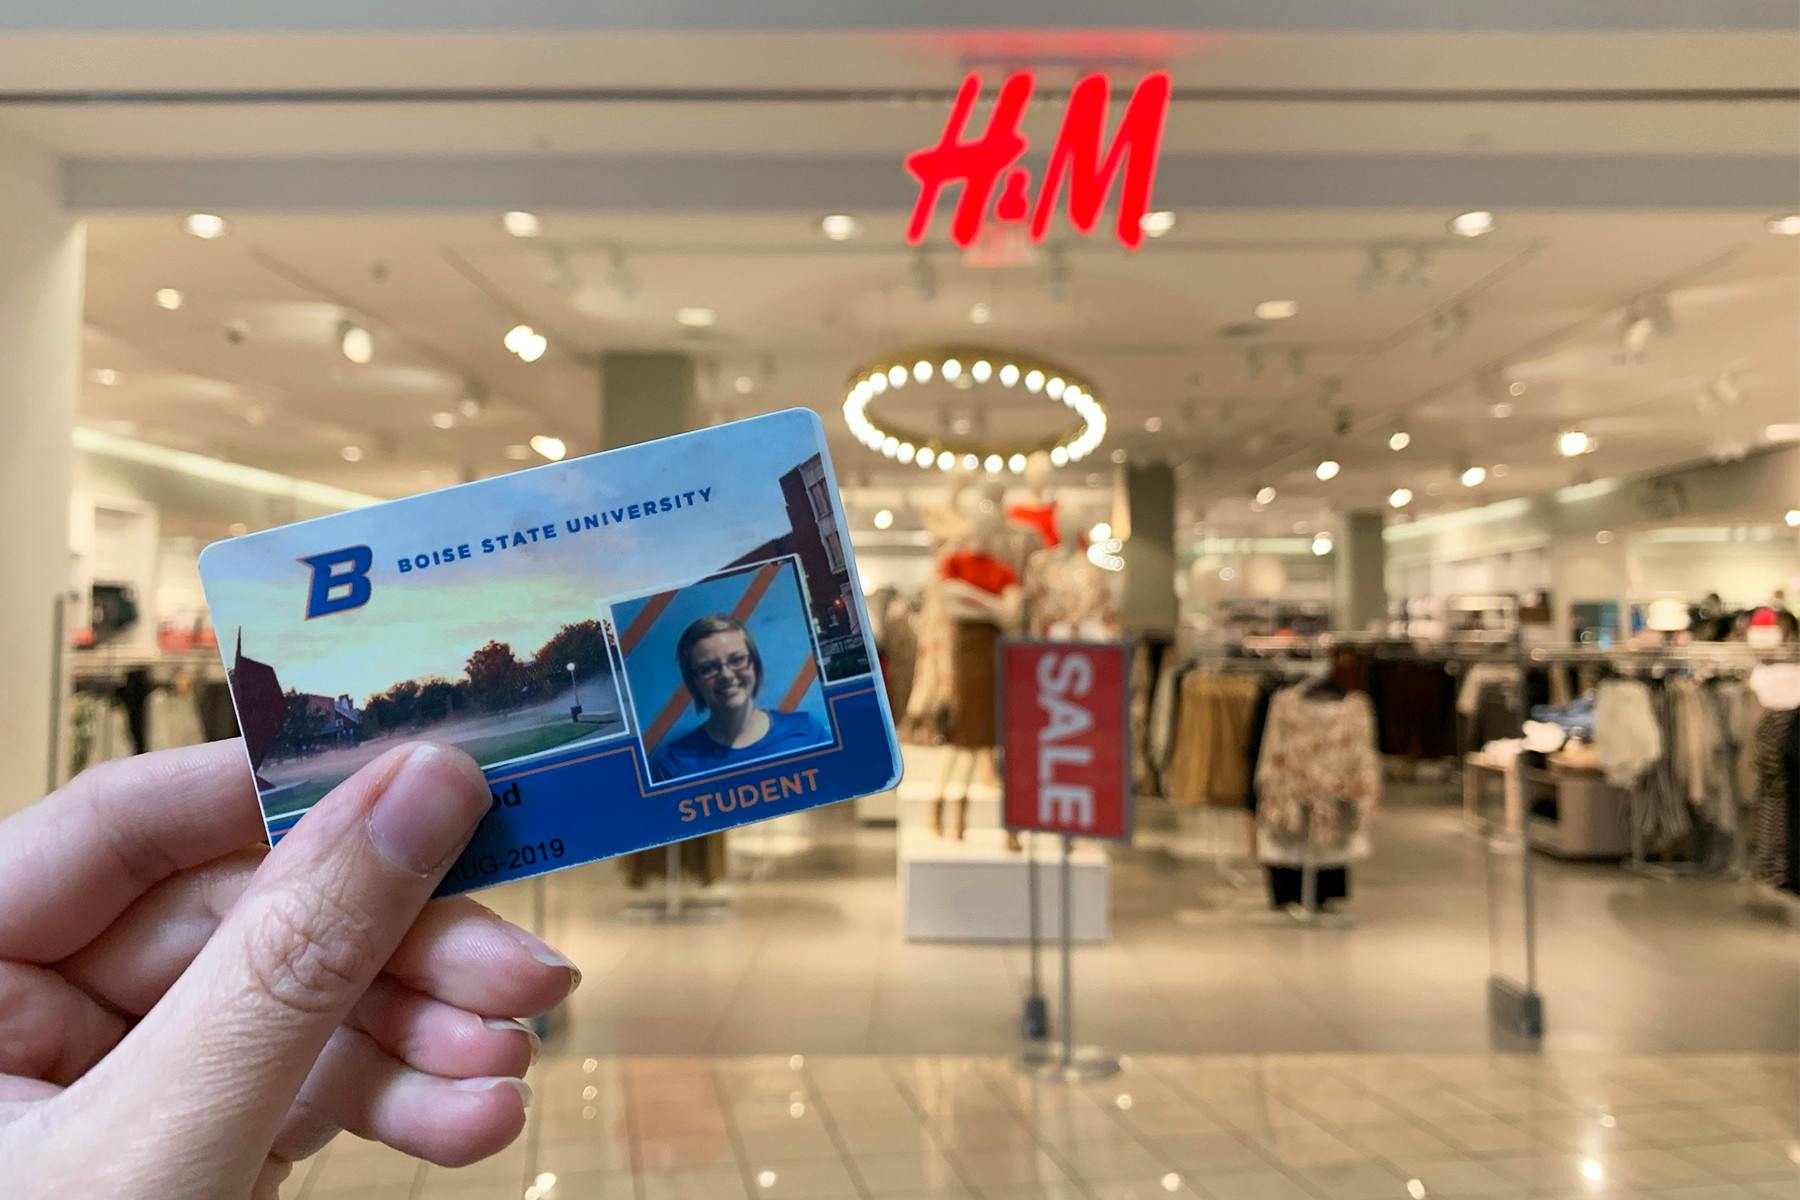 A person's hand holding a Boise State University student ID in front of an H&M storefront inside of a mall.